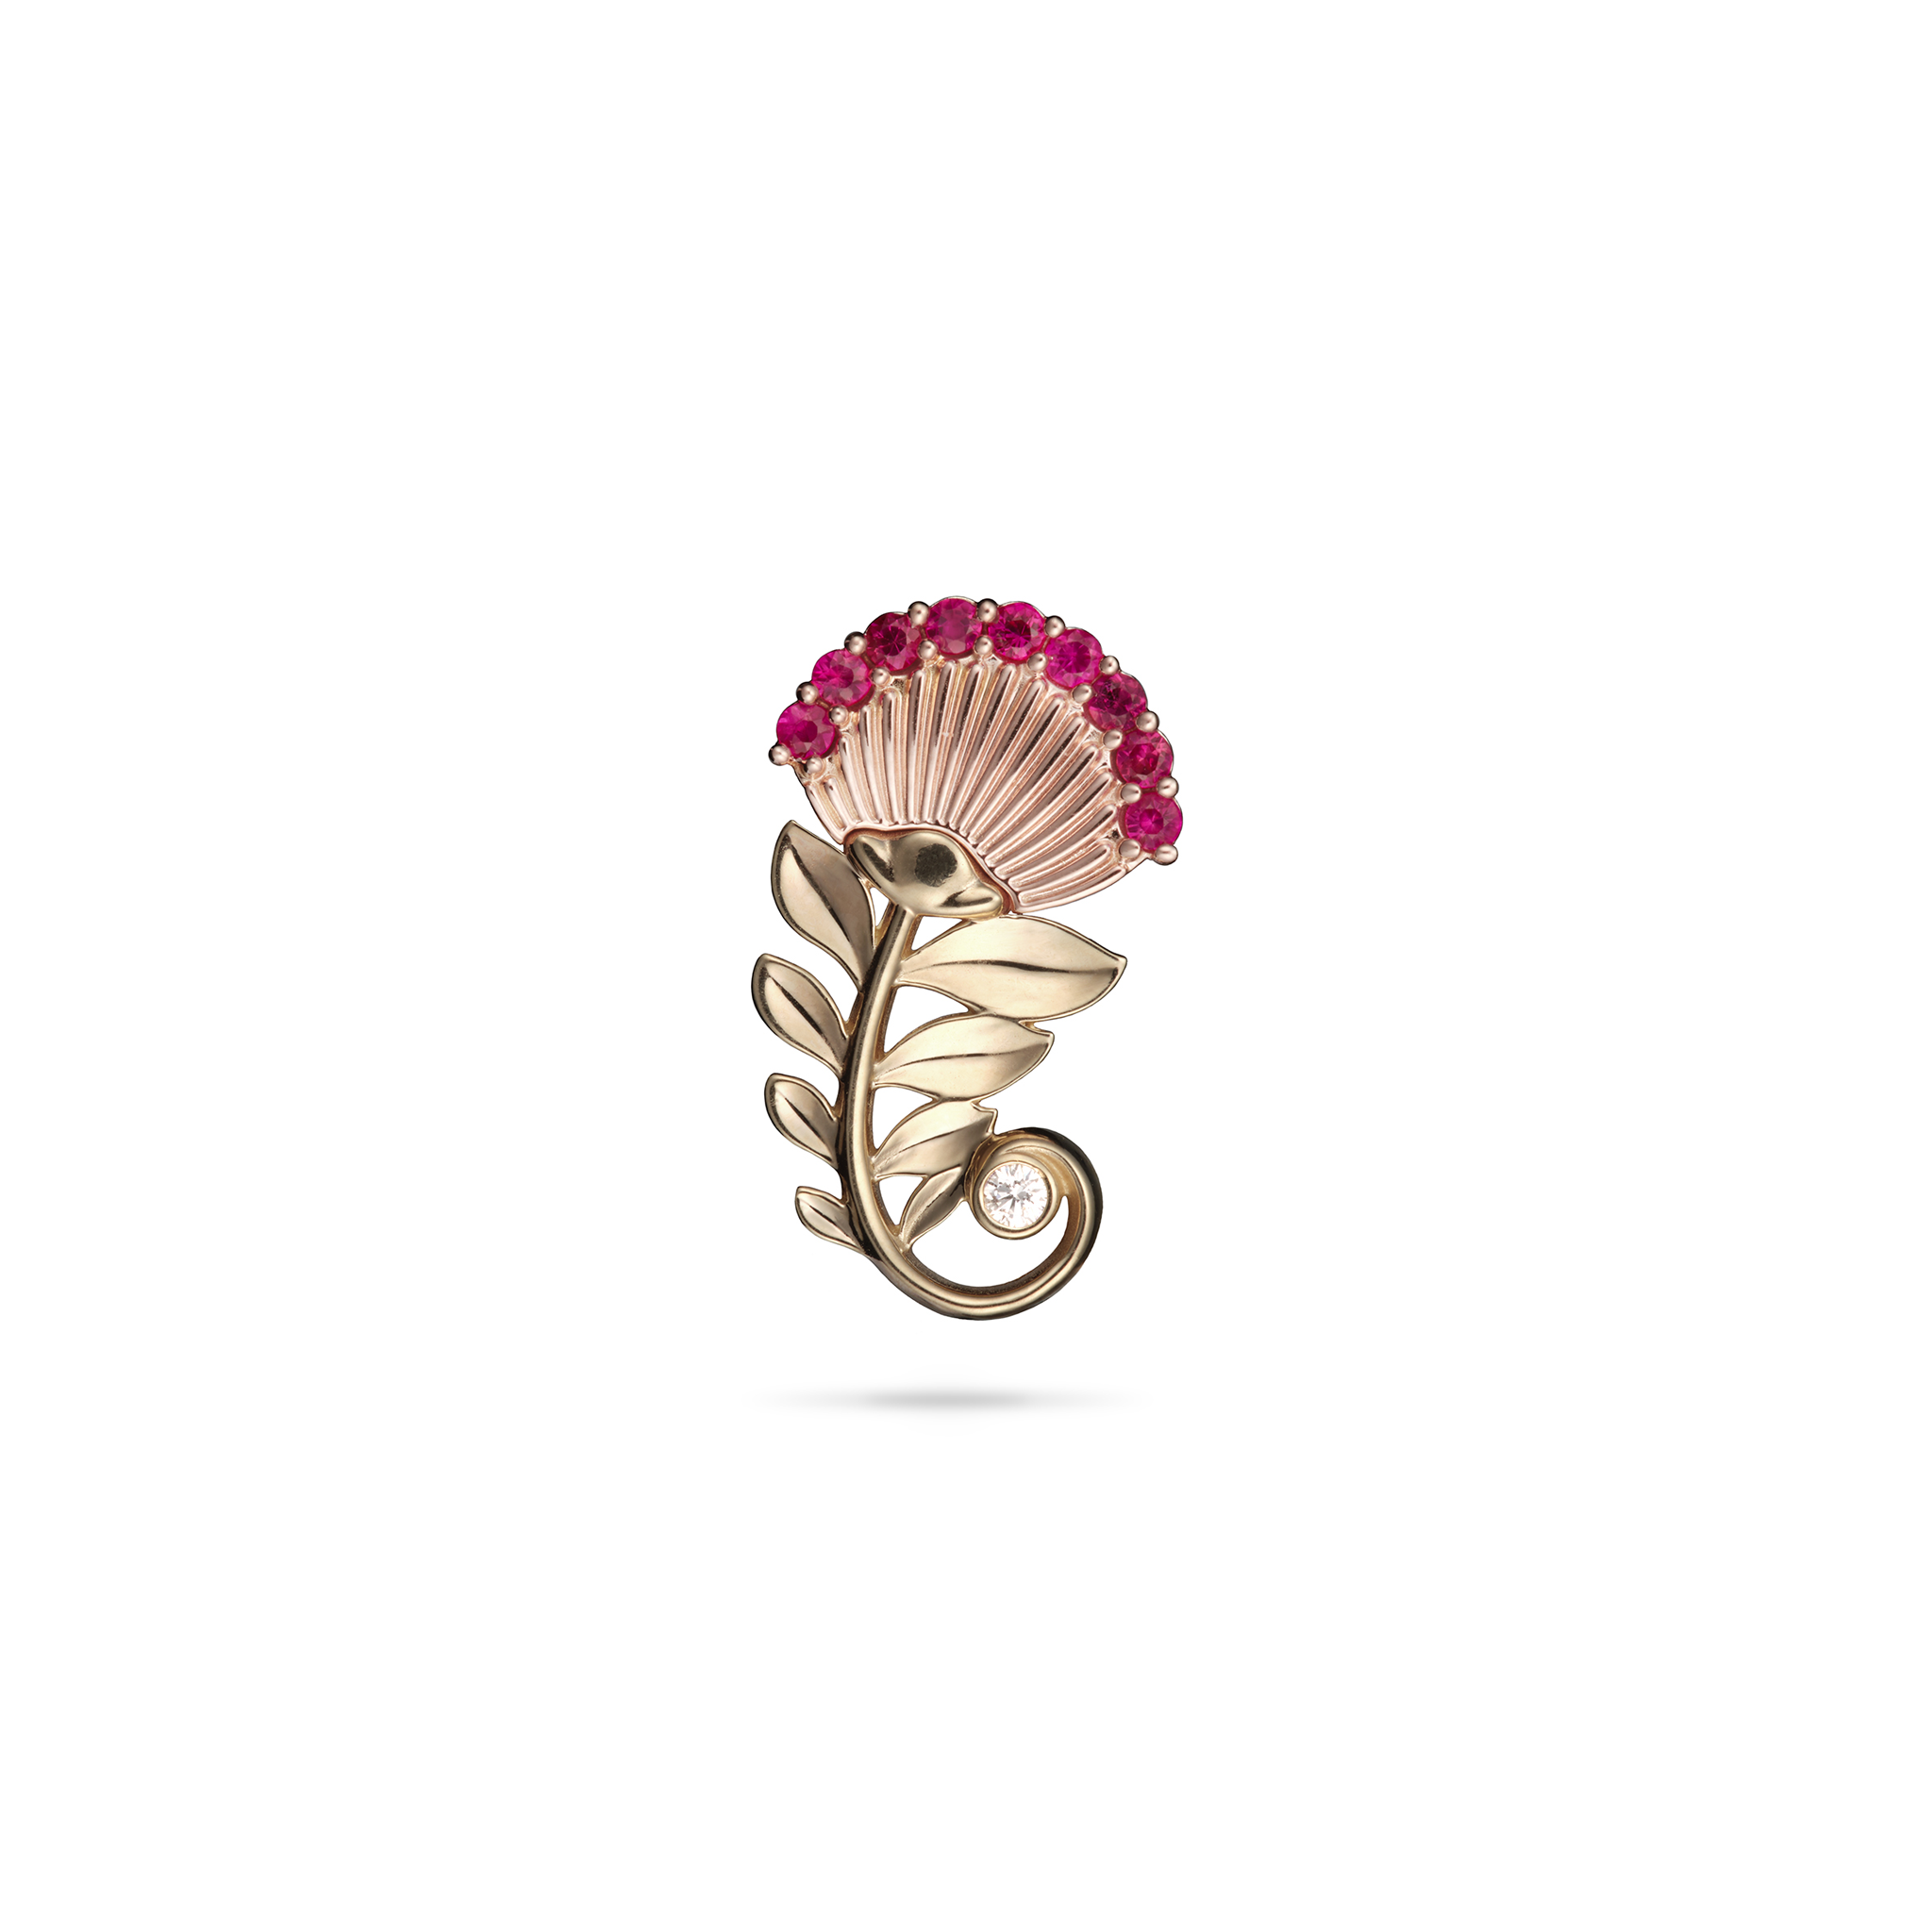 ʻŌhiʻa Lehua Ruby Pendant in Two Tone Gold with Diamonds - 24mm